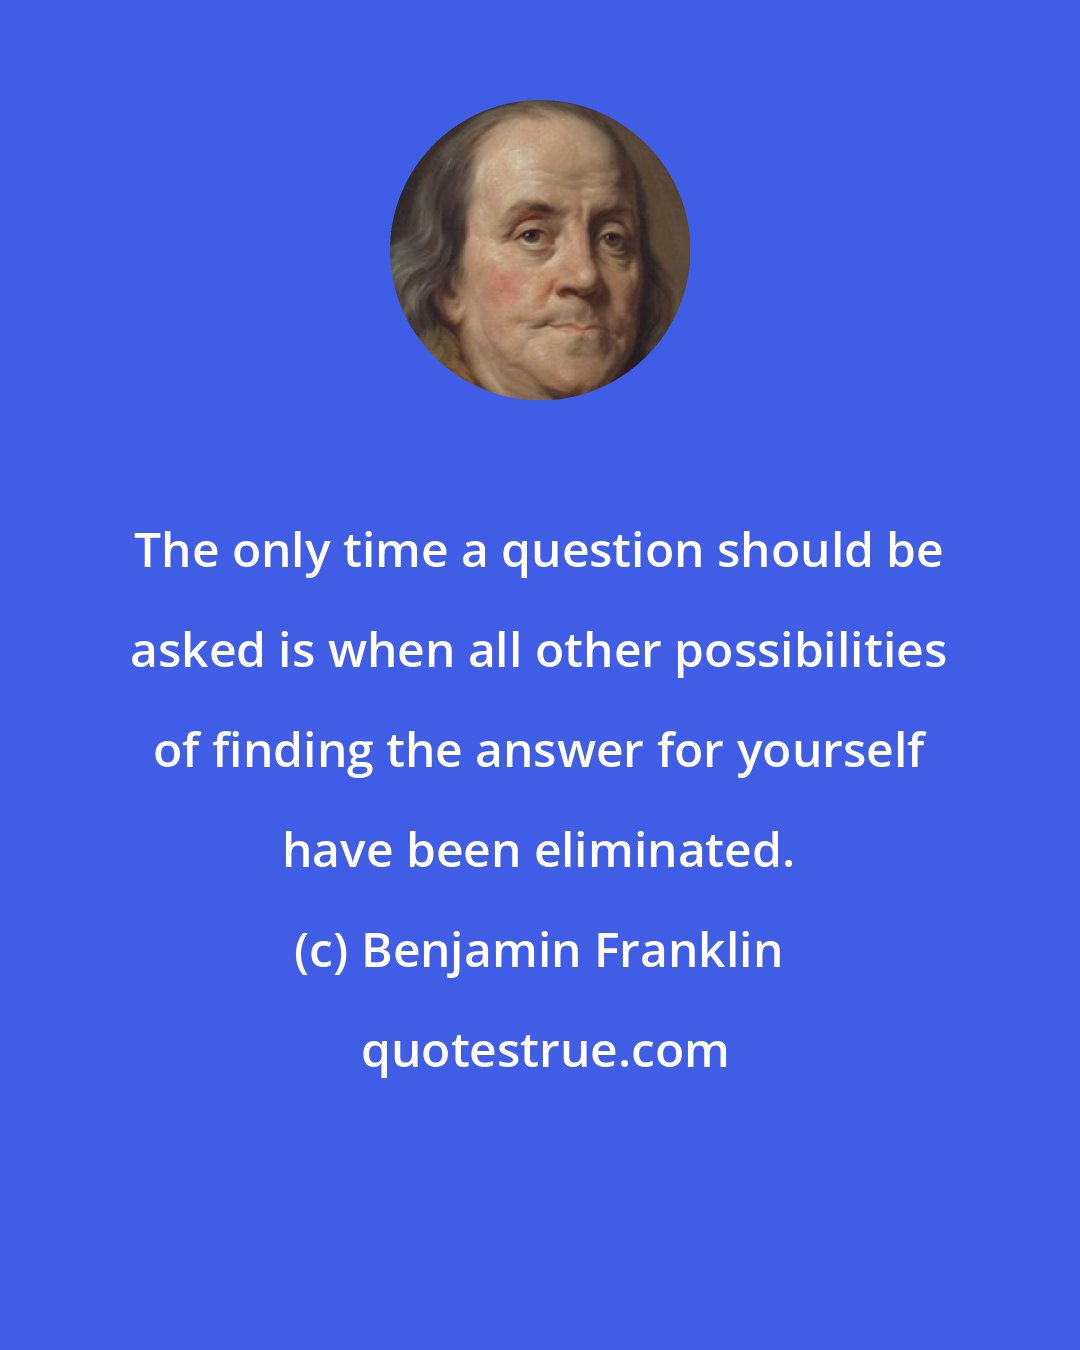 Benjamin Franklin: The only time a question should be asked is when all other possibilities of finding the answer for yourself have been eliminated.